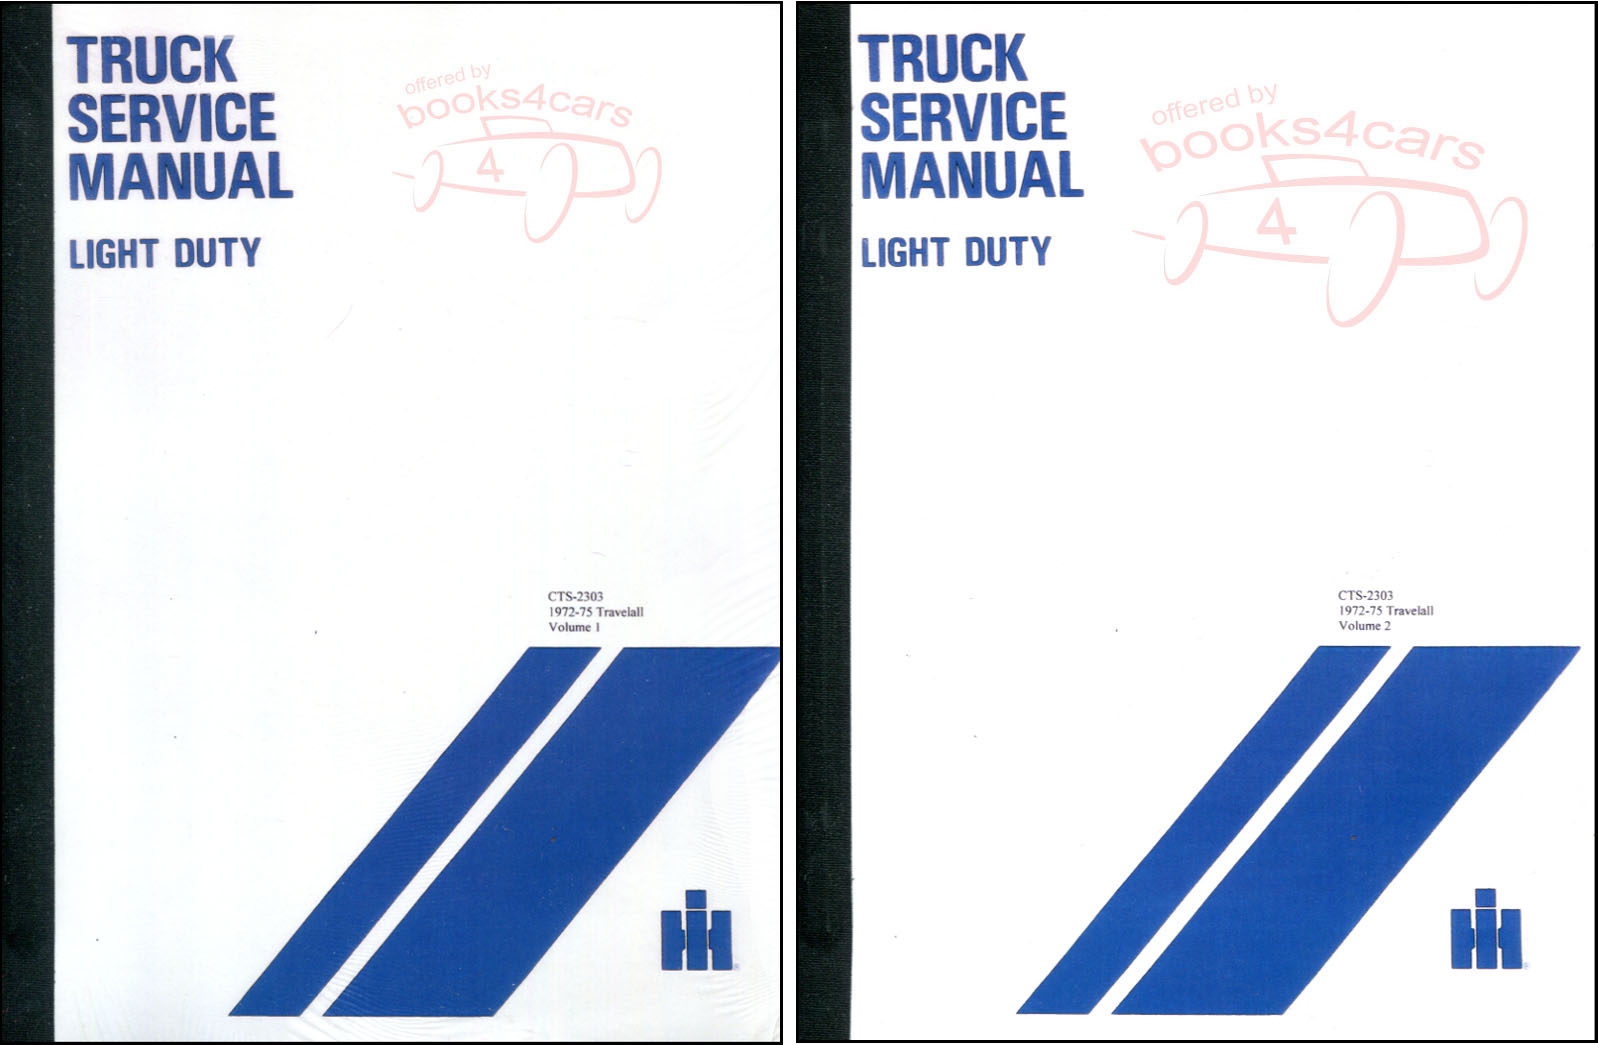 72-75 Pickup & Travelall Shop Service Repair Manual by International Harvester CTS-2303 includes 1010 and others